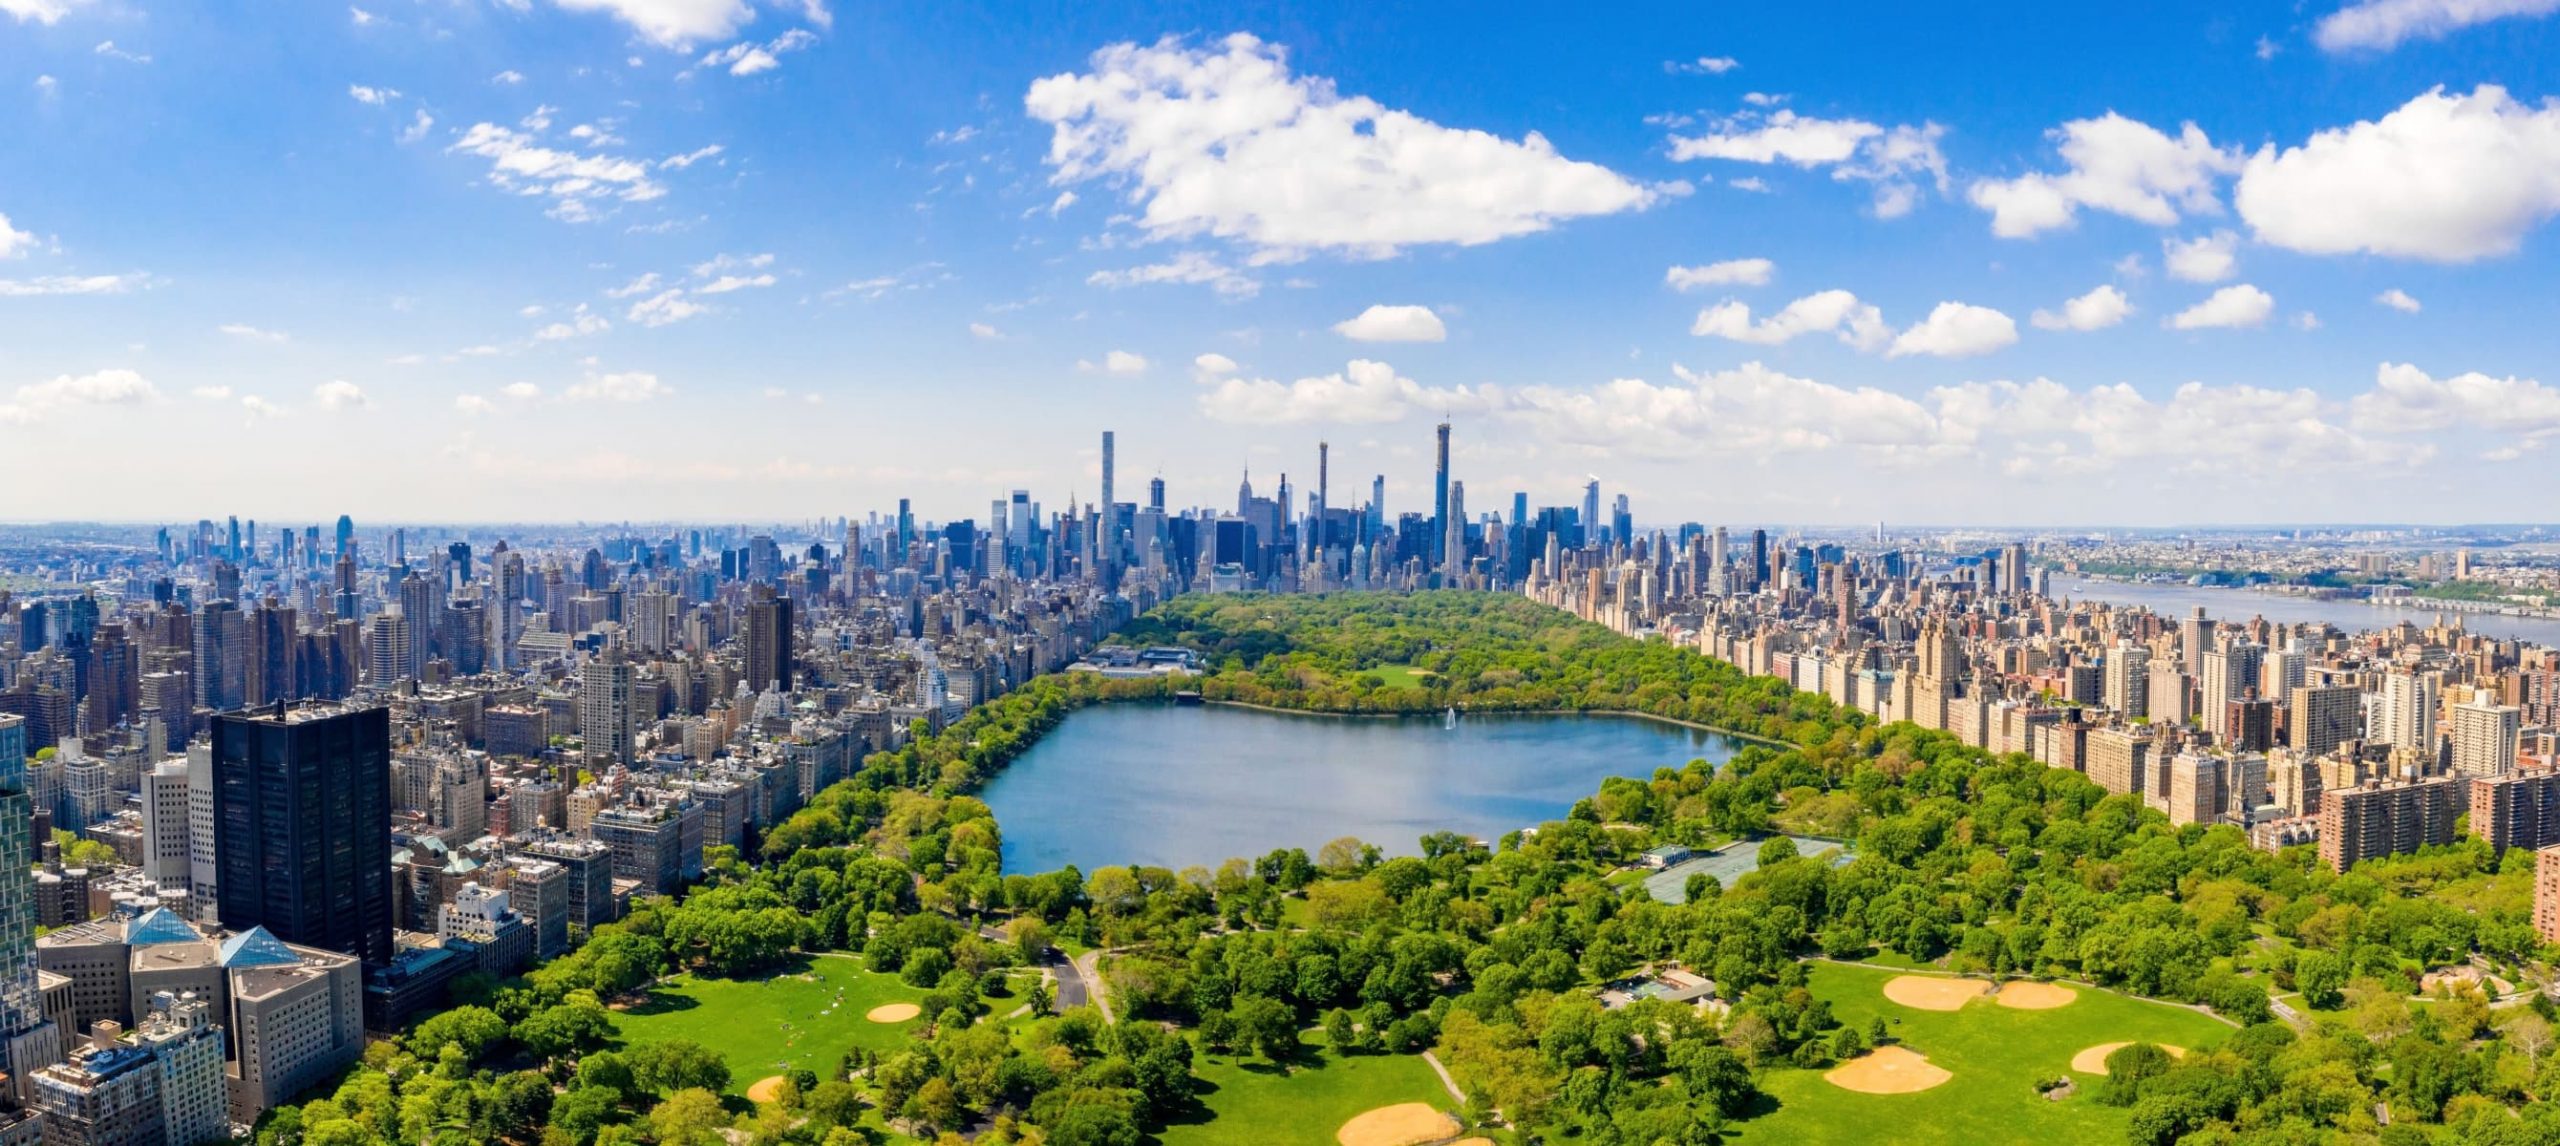 51 Fun Facts About New York That Will Surprise You